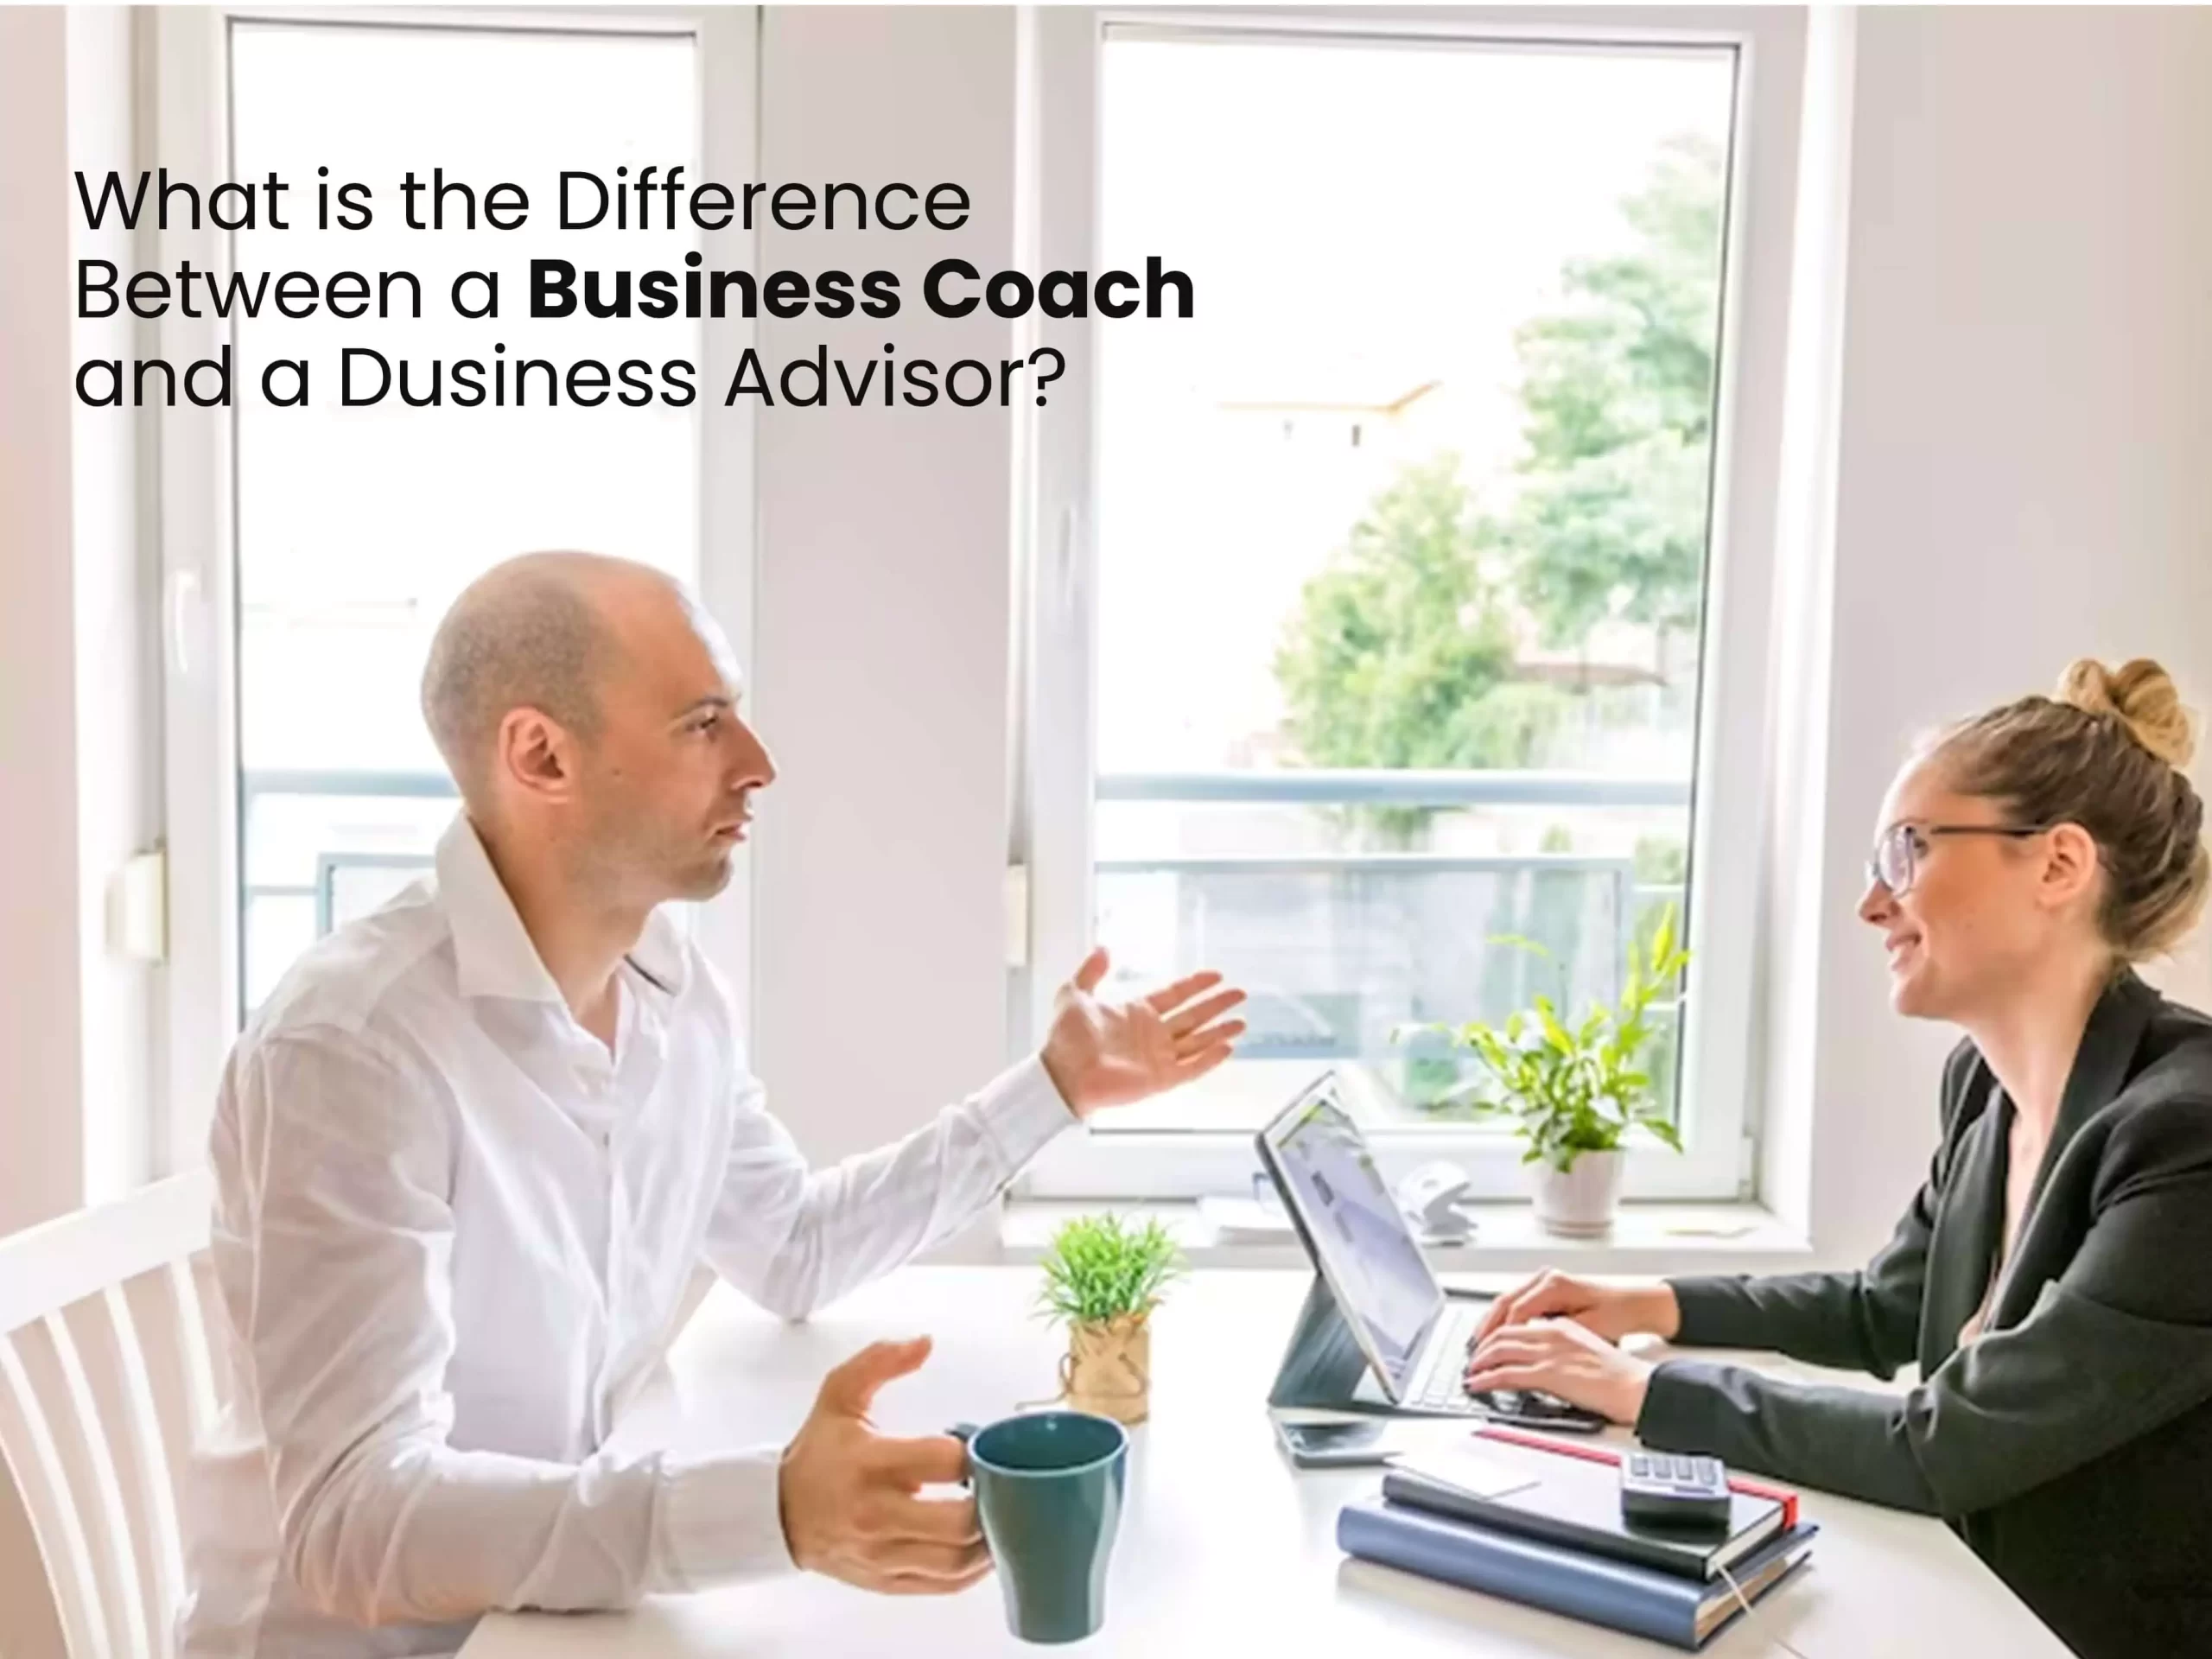 What is the difference between a business coach and a business advisor?